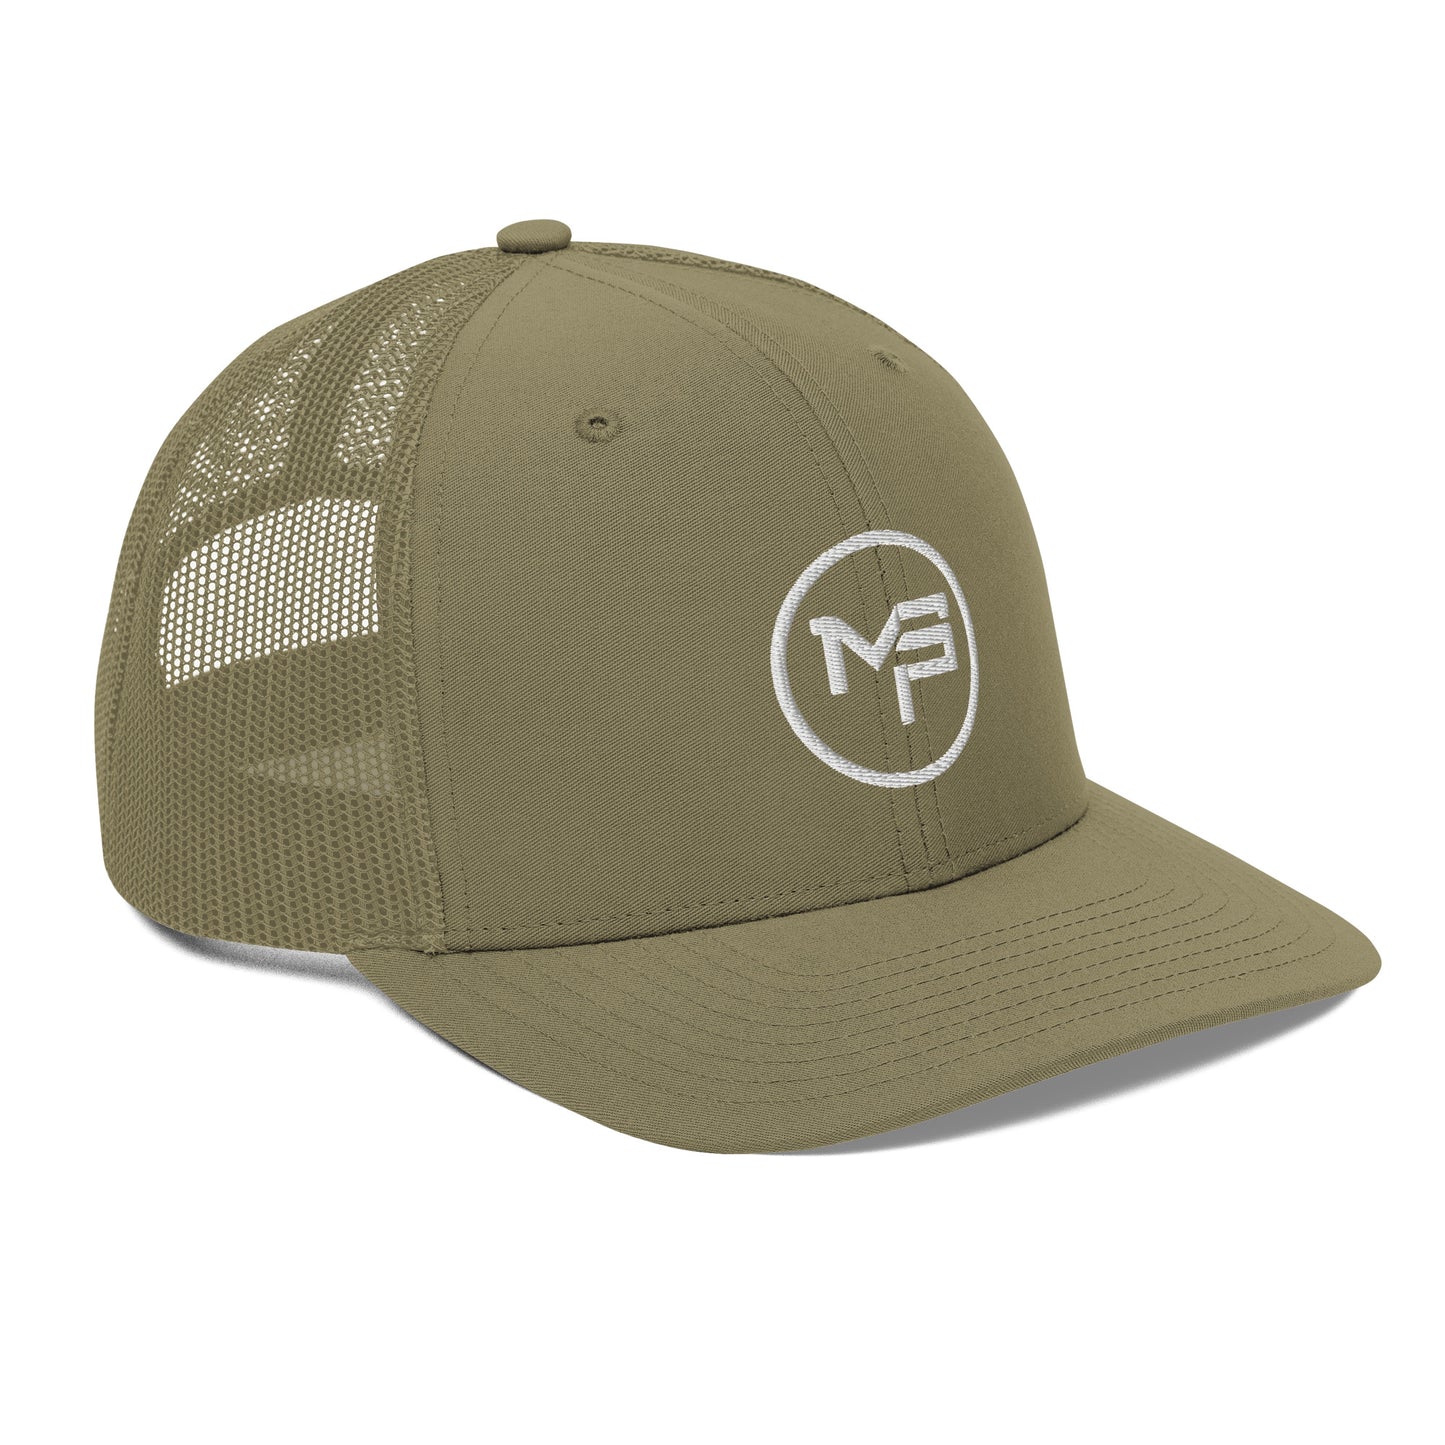 THE MINDSTRONG PROJECT LOGO TRUCKER HAT (MORE COLORS)